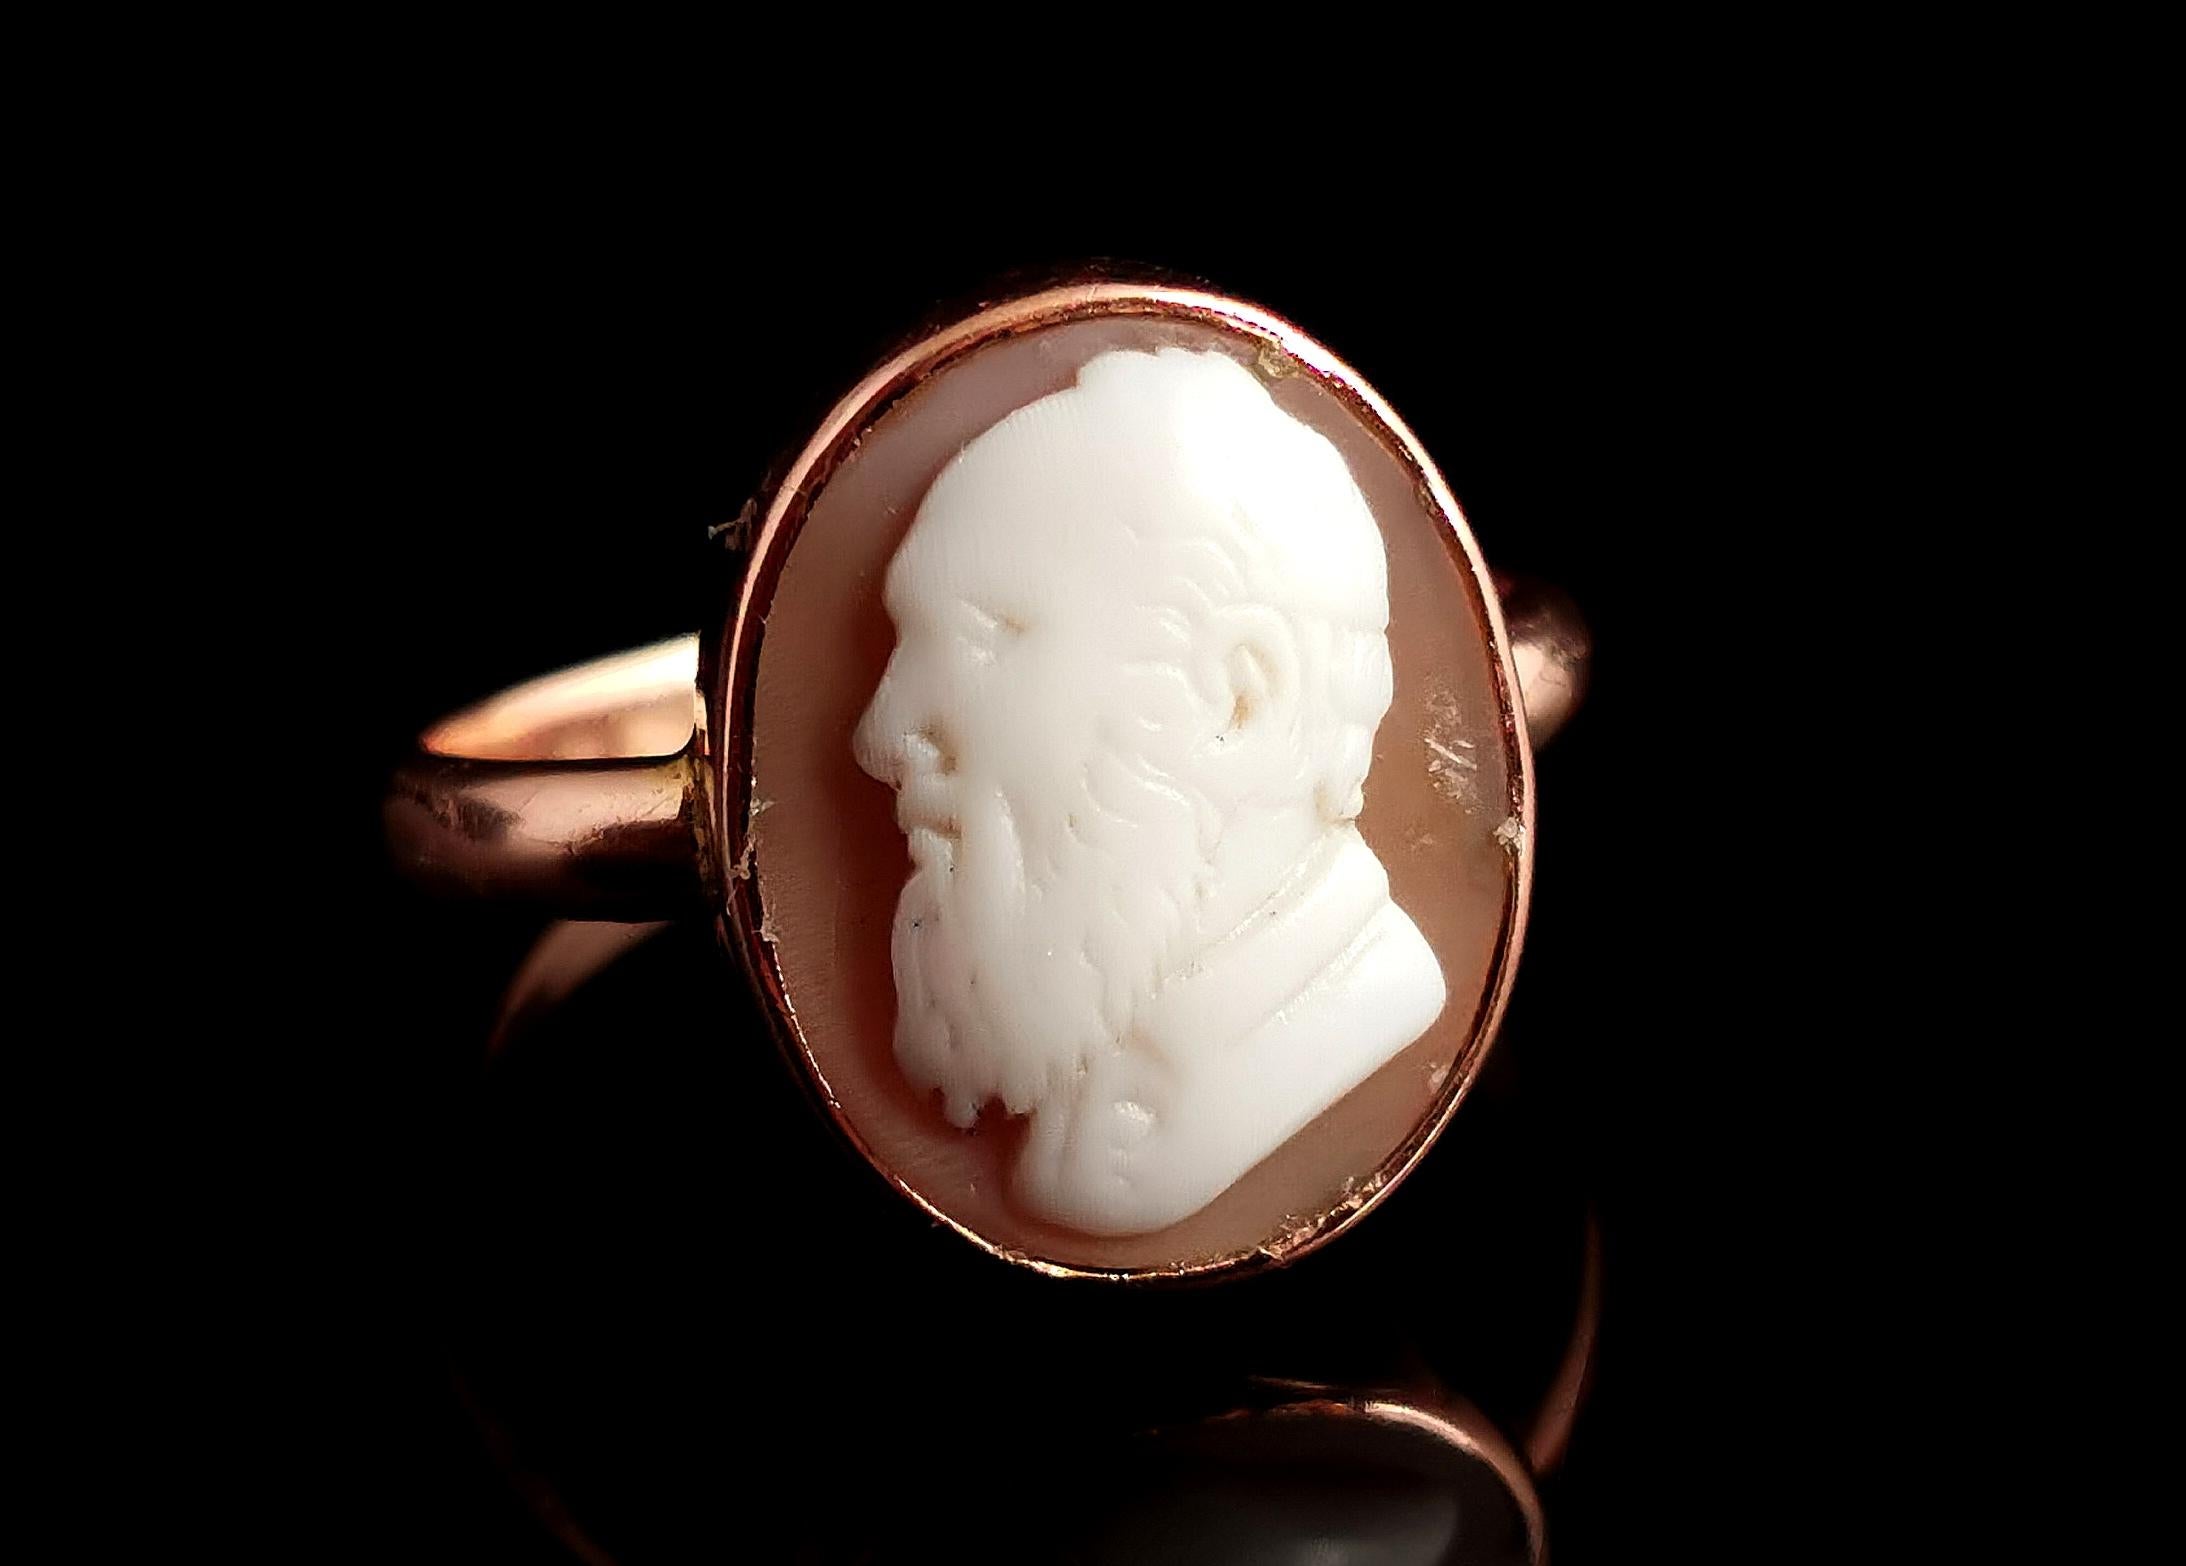 A gorgeous antique, Edwardian era 9kt gold cameo ring.

A handsome carved bullmouth shell cameo with a portrait of a bearded gentleman, an intricate and detailed carving.

It is set into a rich 9kt yellow gold bezel frame with a smooth 9kt gold band